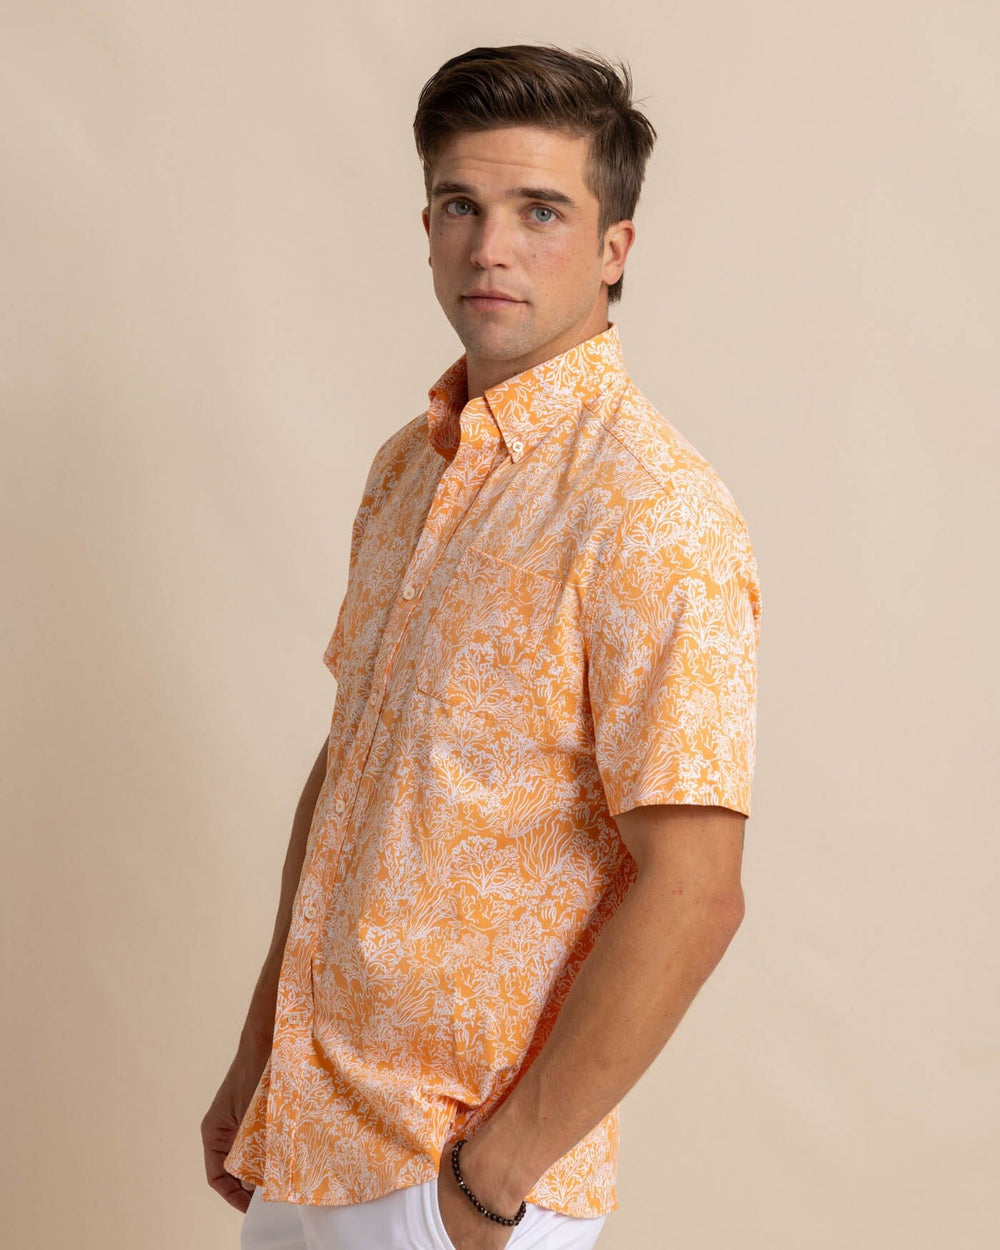 The front view of the Southern Tide Floral Coral Intercoastal Short Sleeve Sport Shirt by Southern Tide - Tangerine Orange